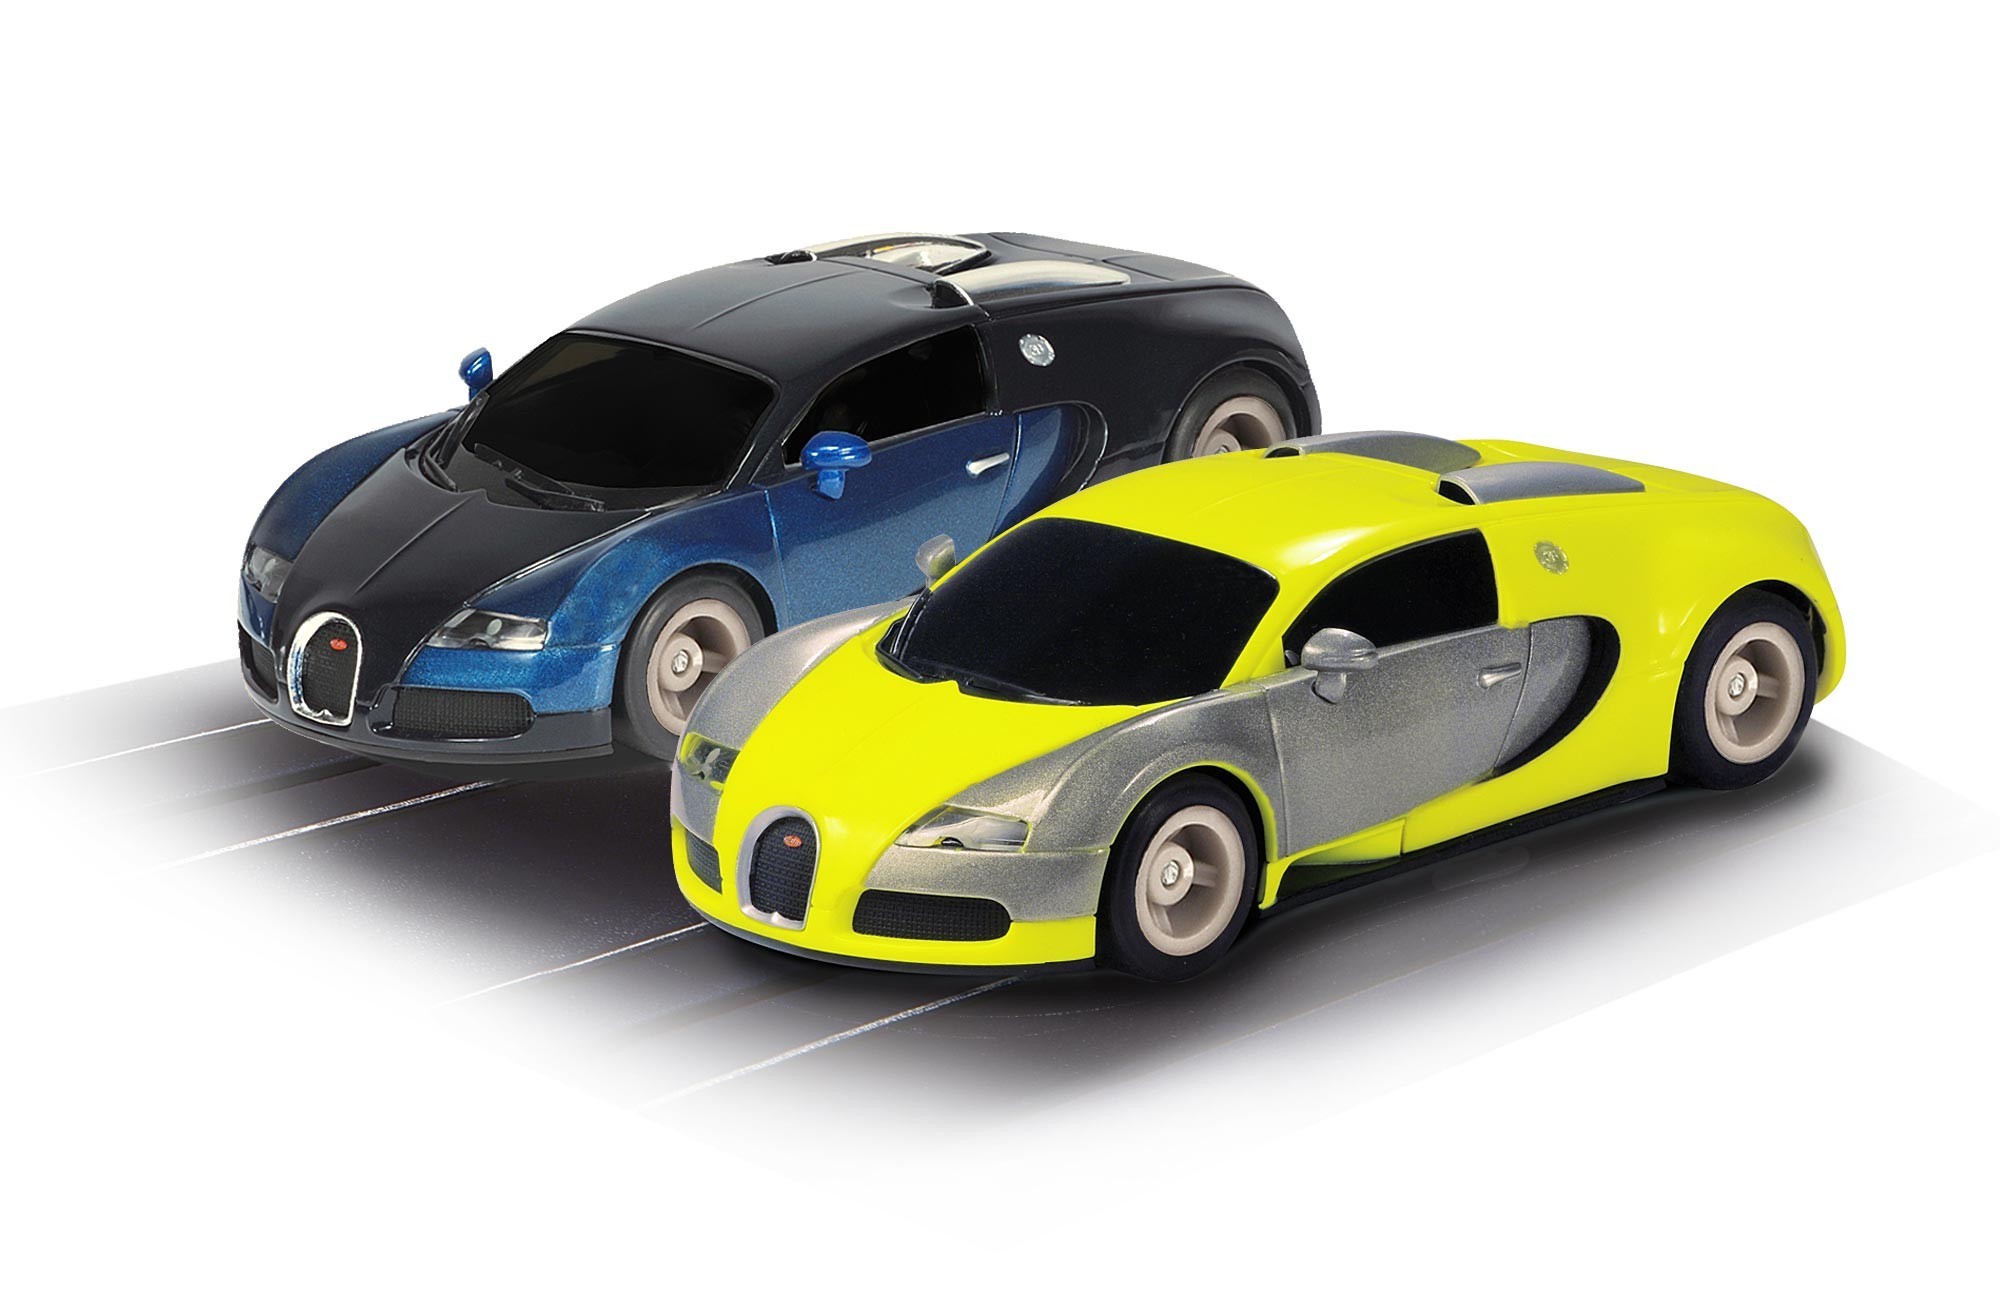 MORE CARS 4 SALE PAIR 1:64 SCALE COMPLETE MICRO SCALEXTRIC RALLY BUGATTI CARS 